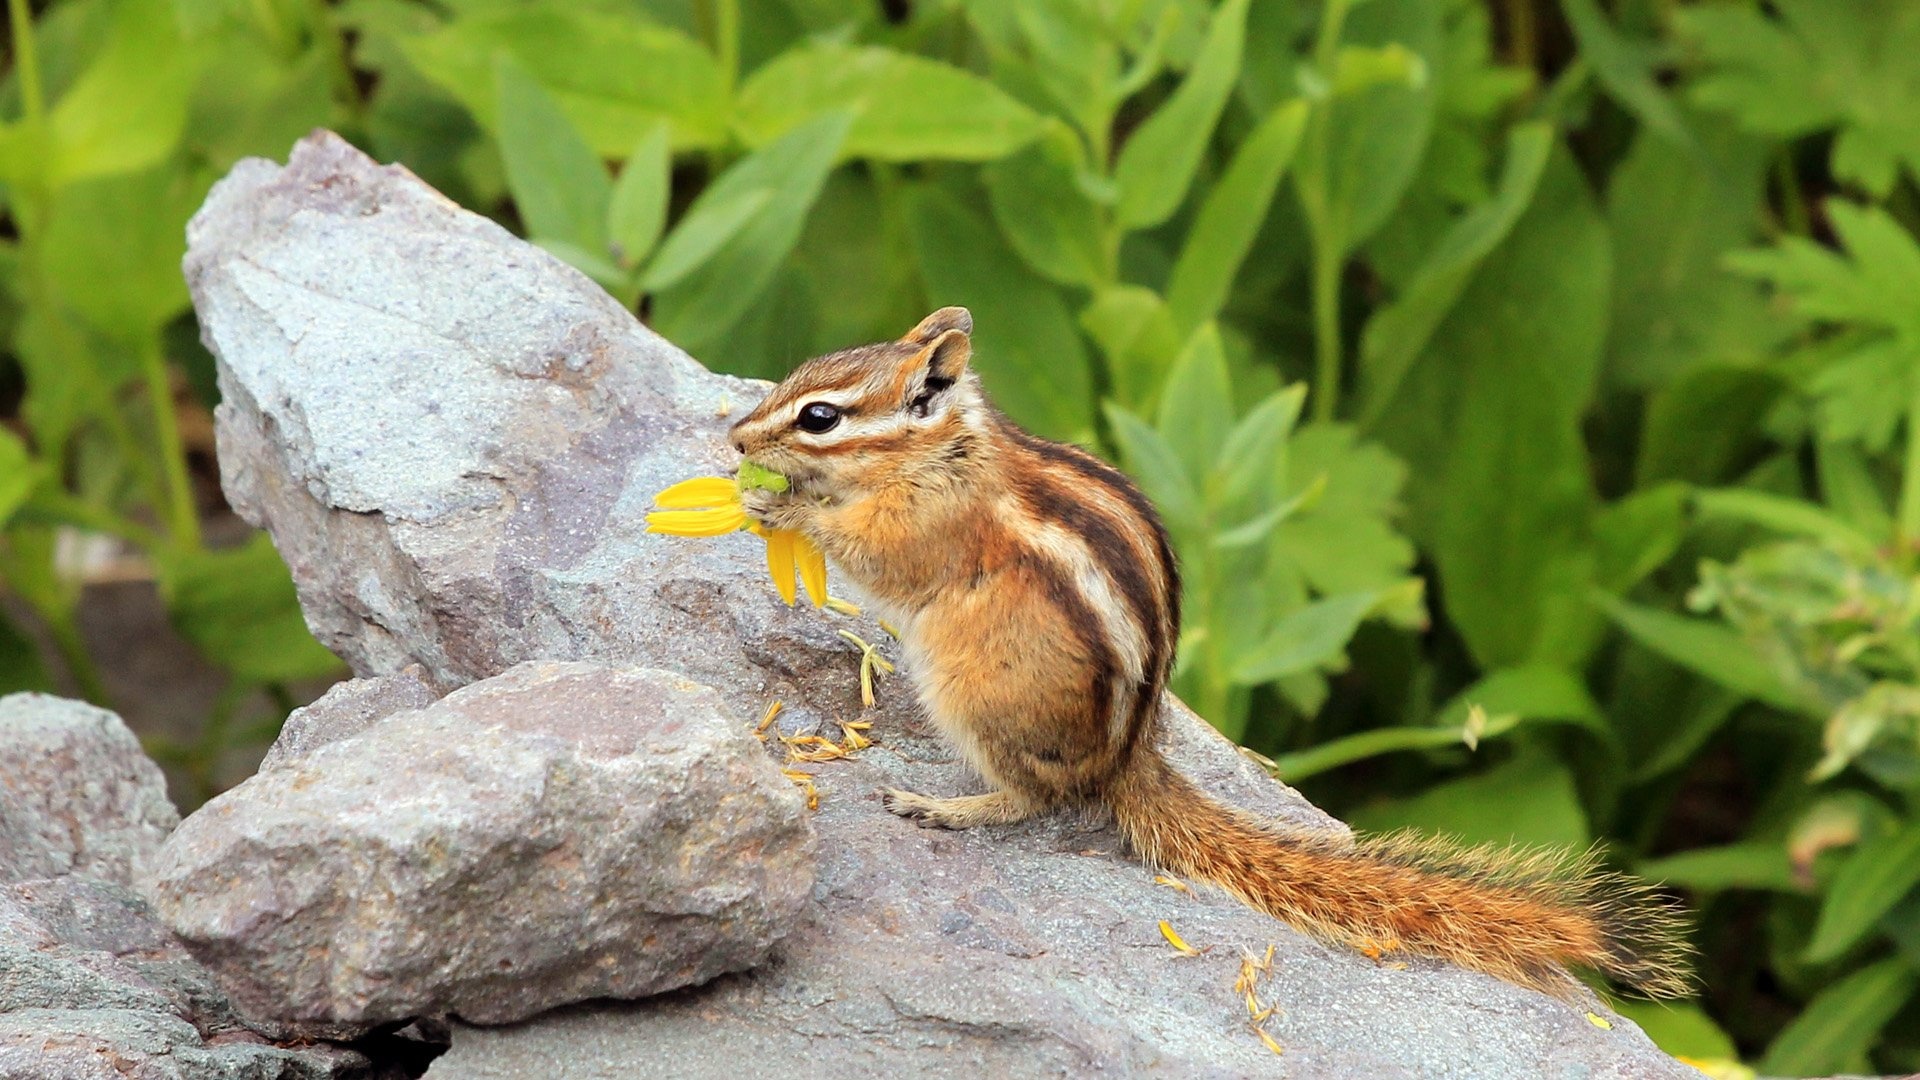 Chipmunk: Construct expansive burrows which can be more than 11 feet in length. 1920x1080 Full HD Wallpaper.